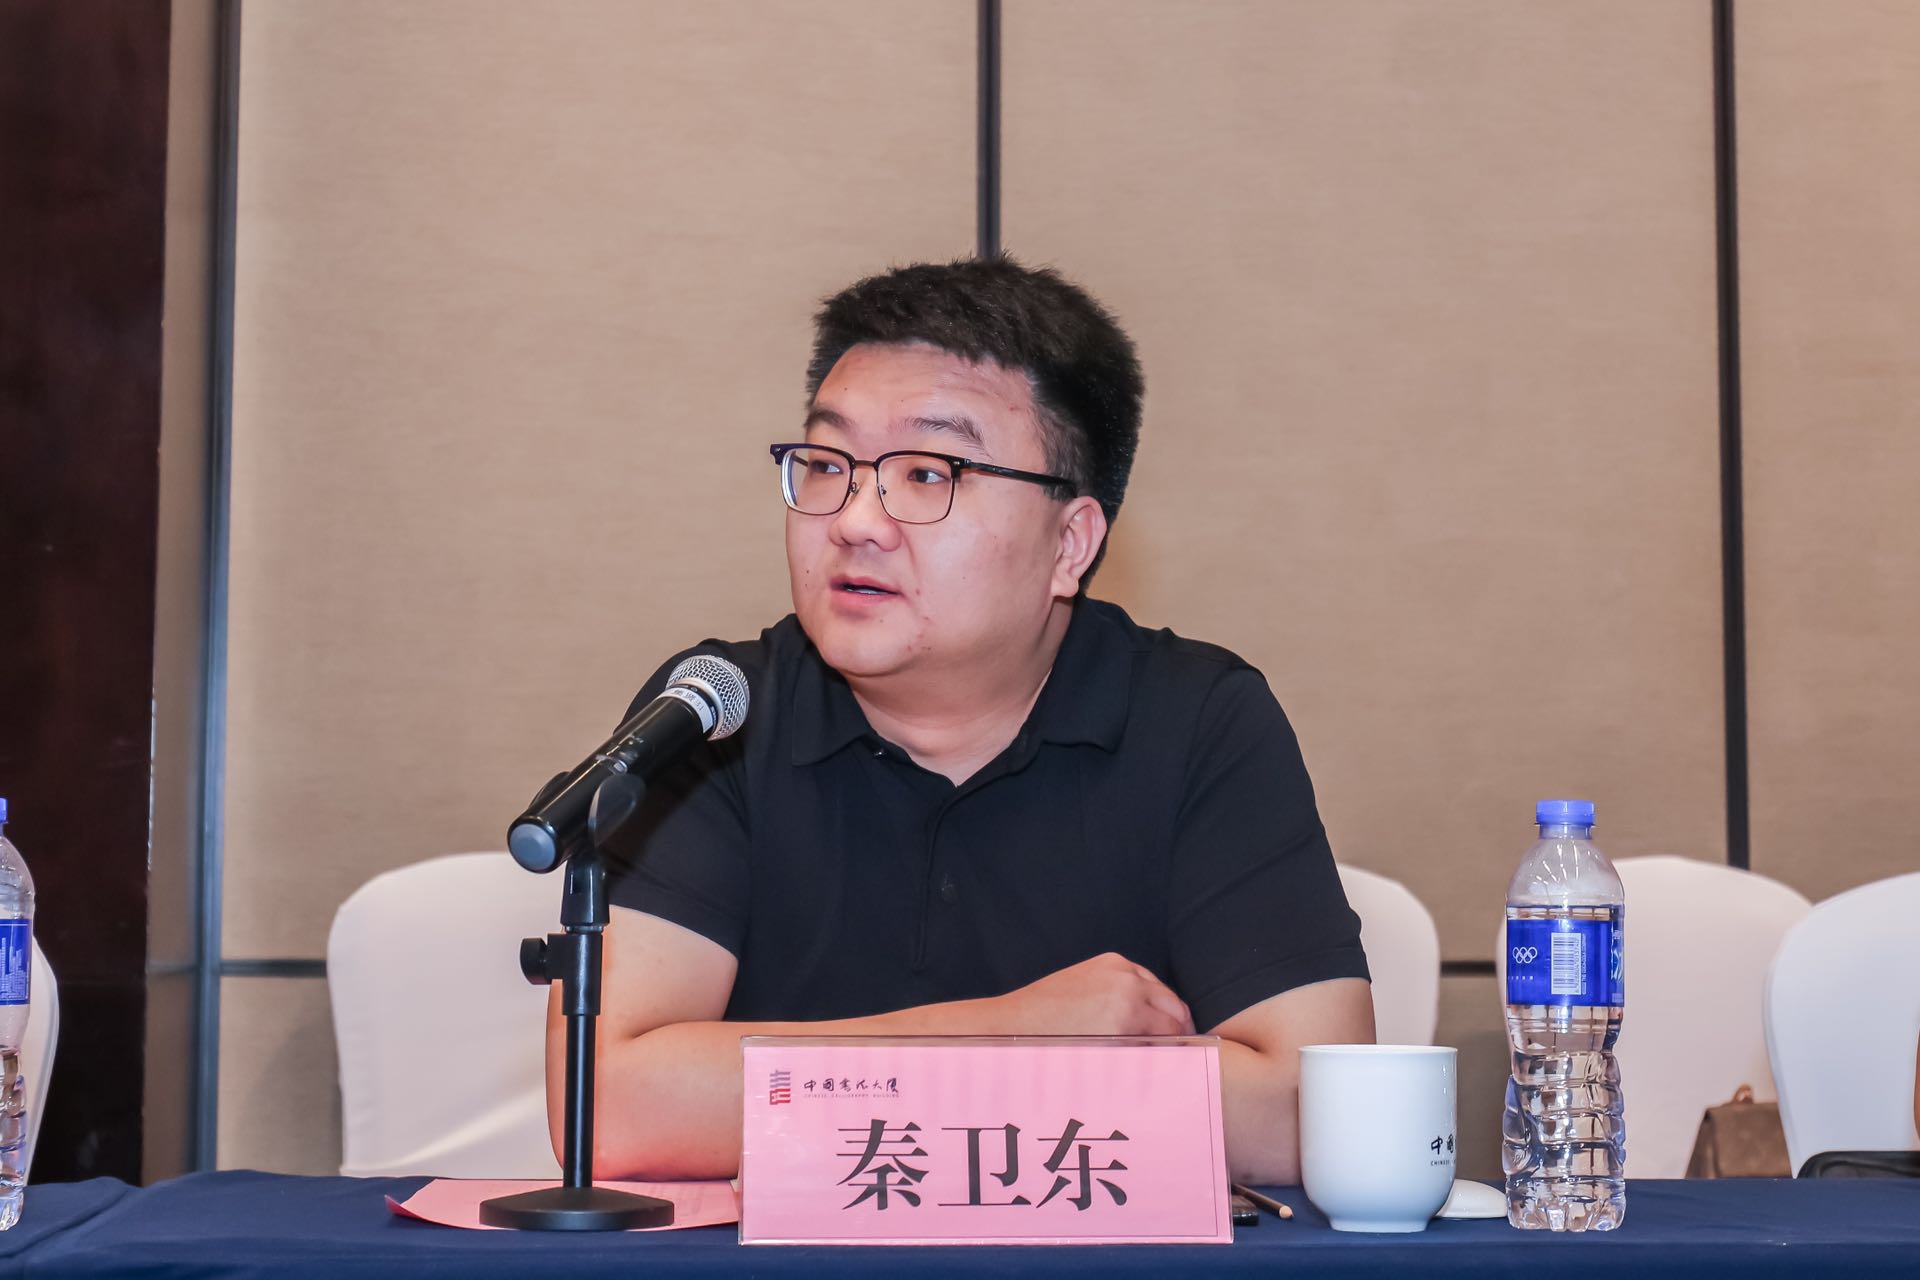 Qin Weidong, Deputy General Manager of Saining Net Security